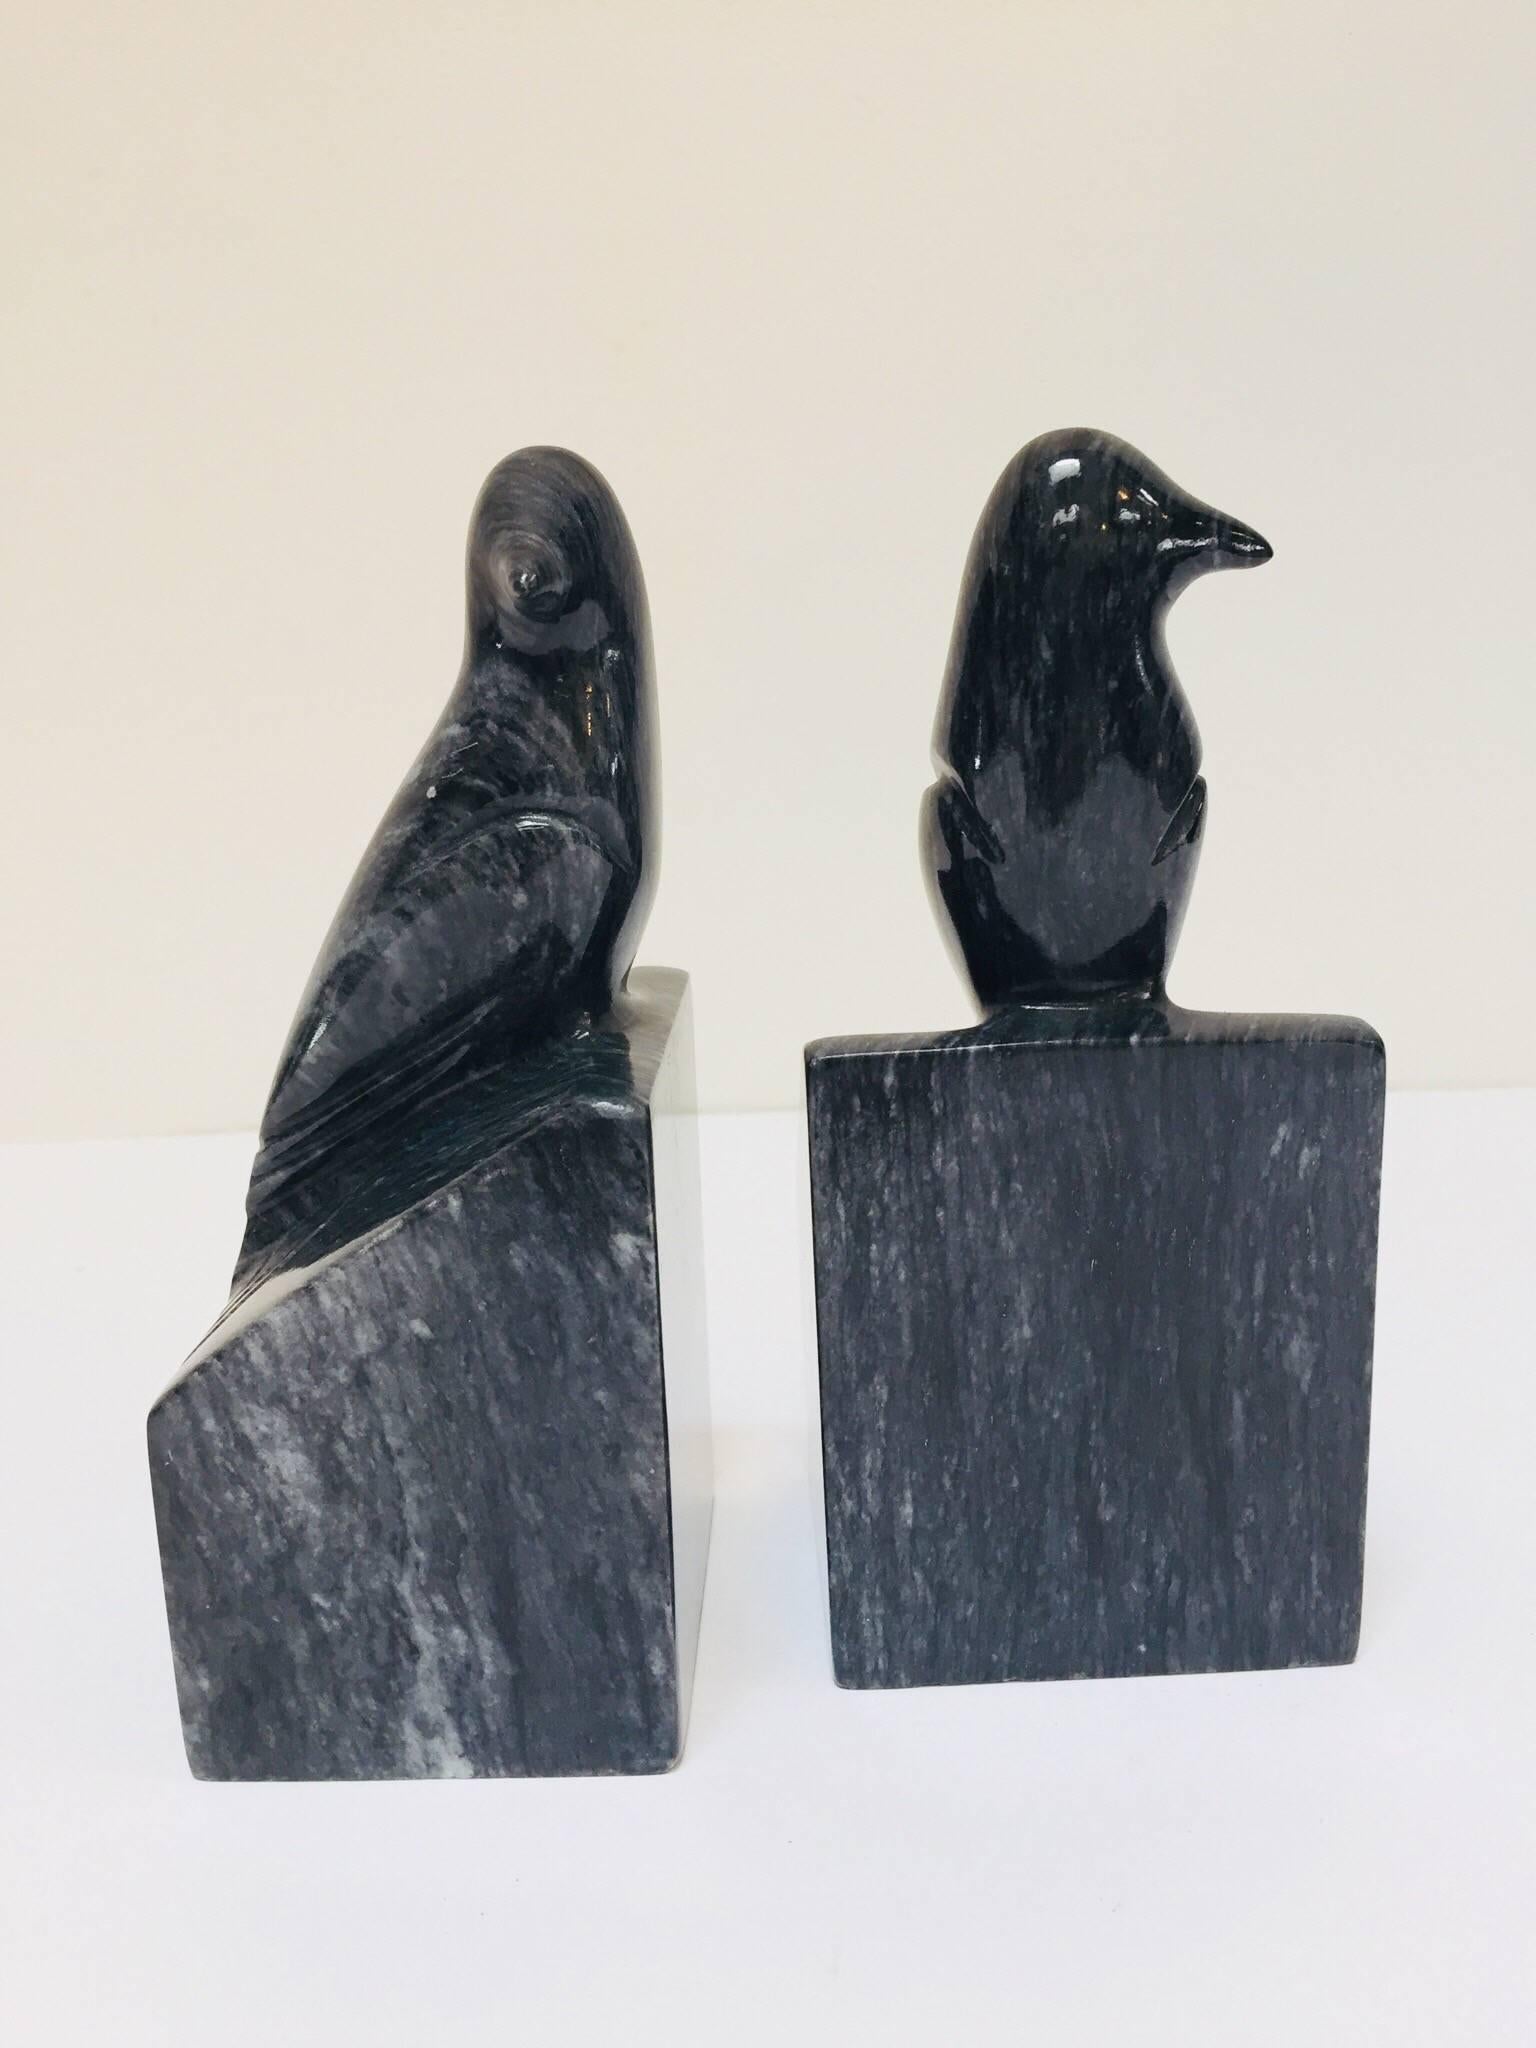 Pair of black marble birds perched on a pillar bookends.
This sleek little birds will add a very natural organic note to any modern or classic interior.
Great hand carved birds with color in shades of black and grey.
Art Deco style book ends made in